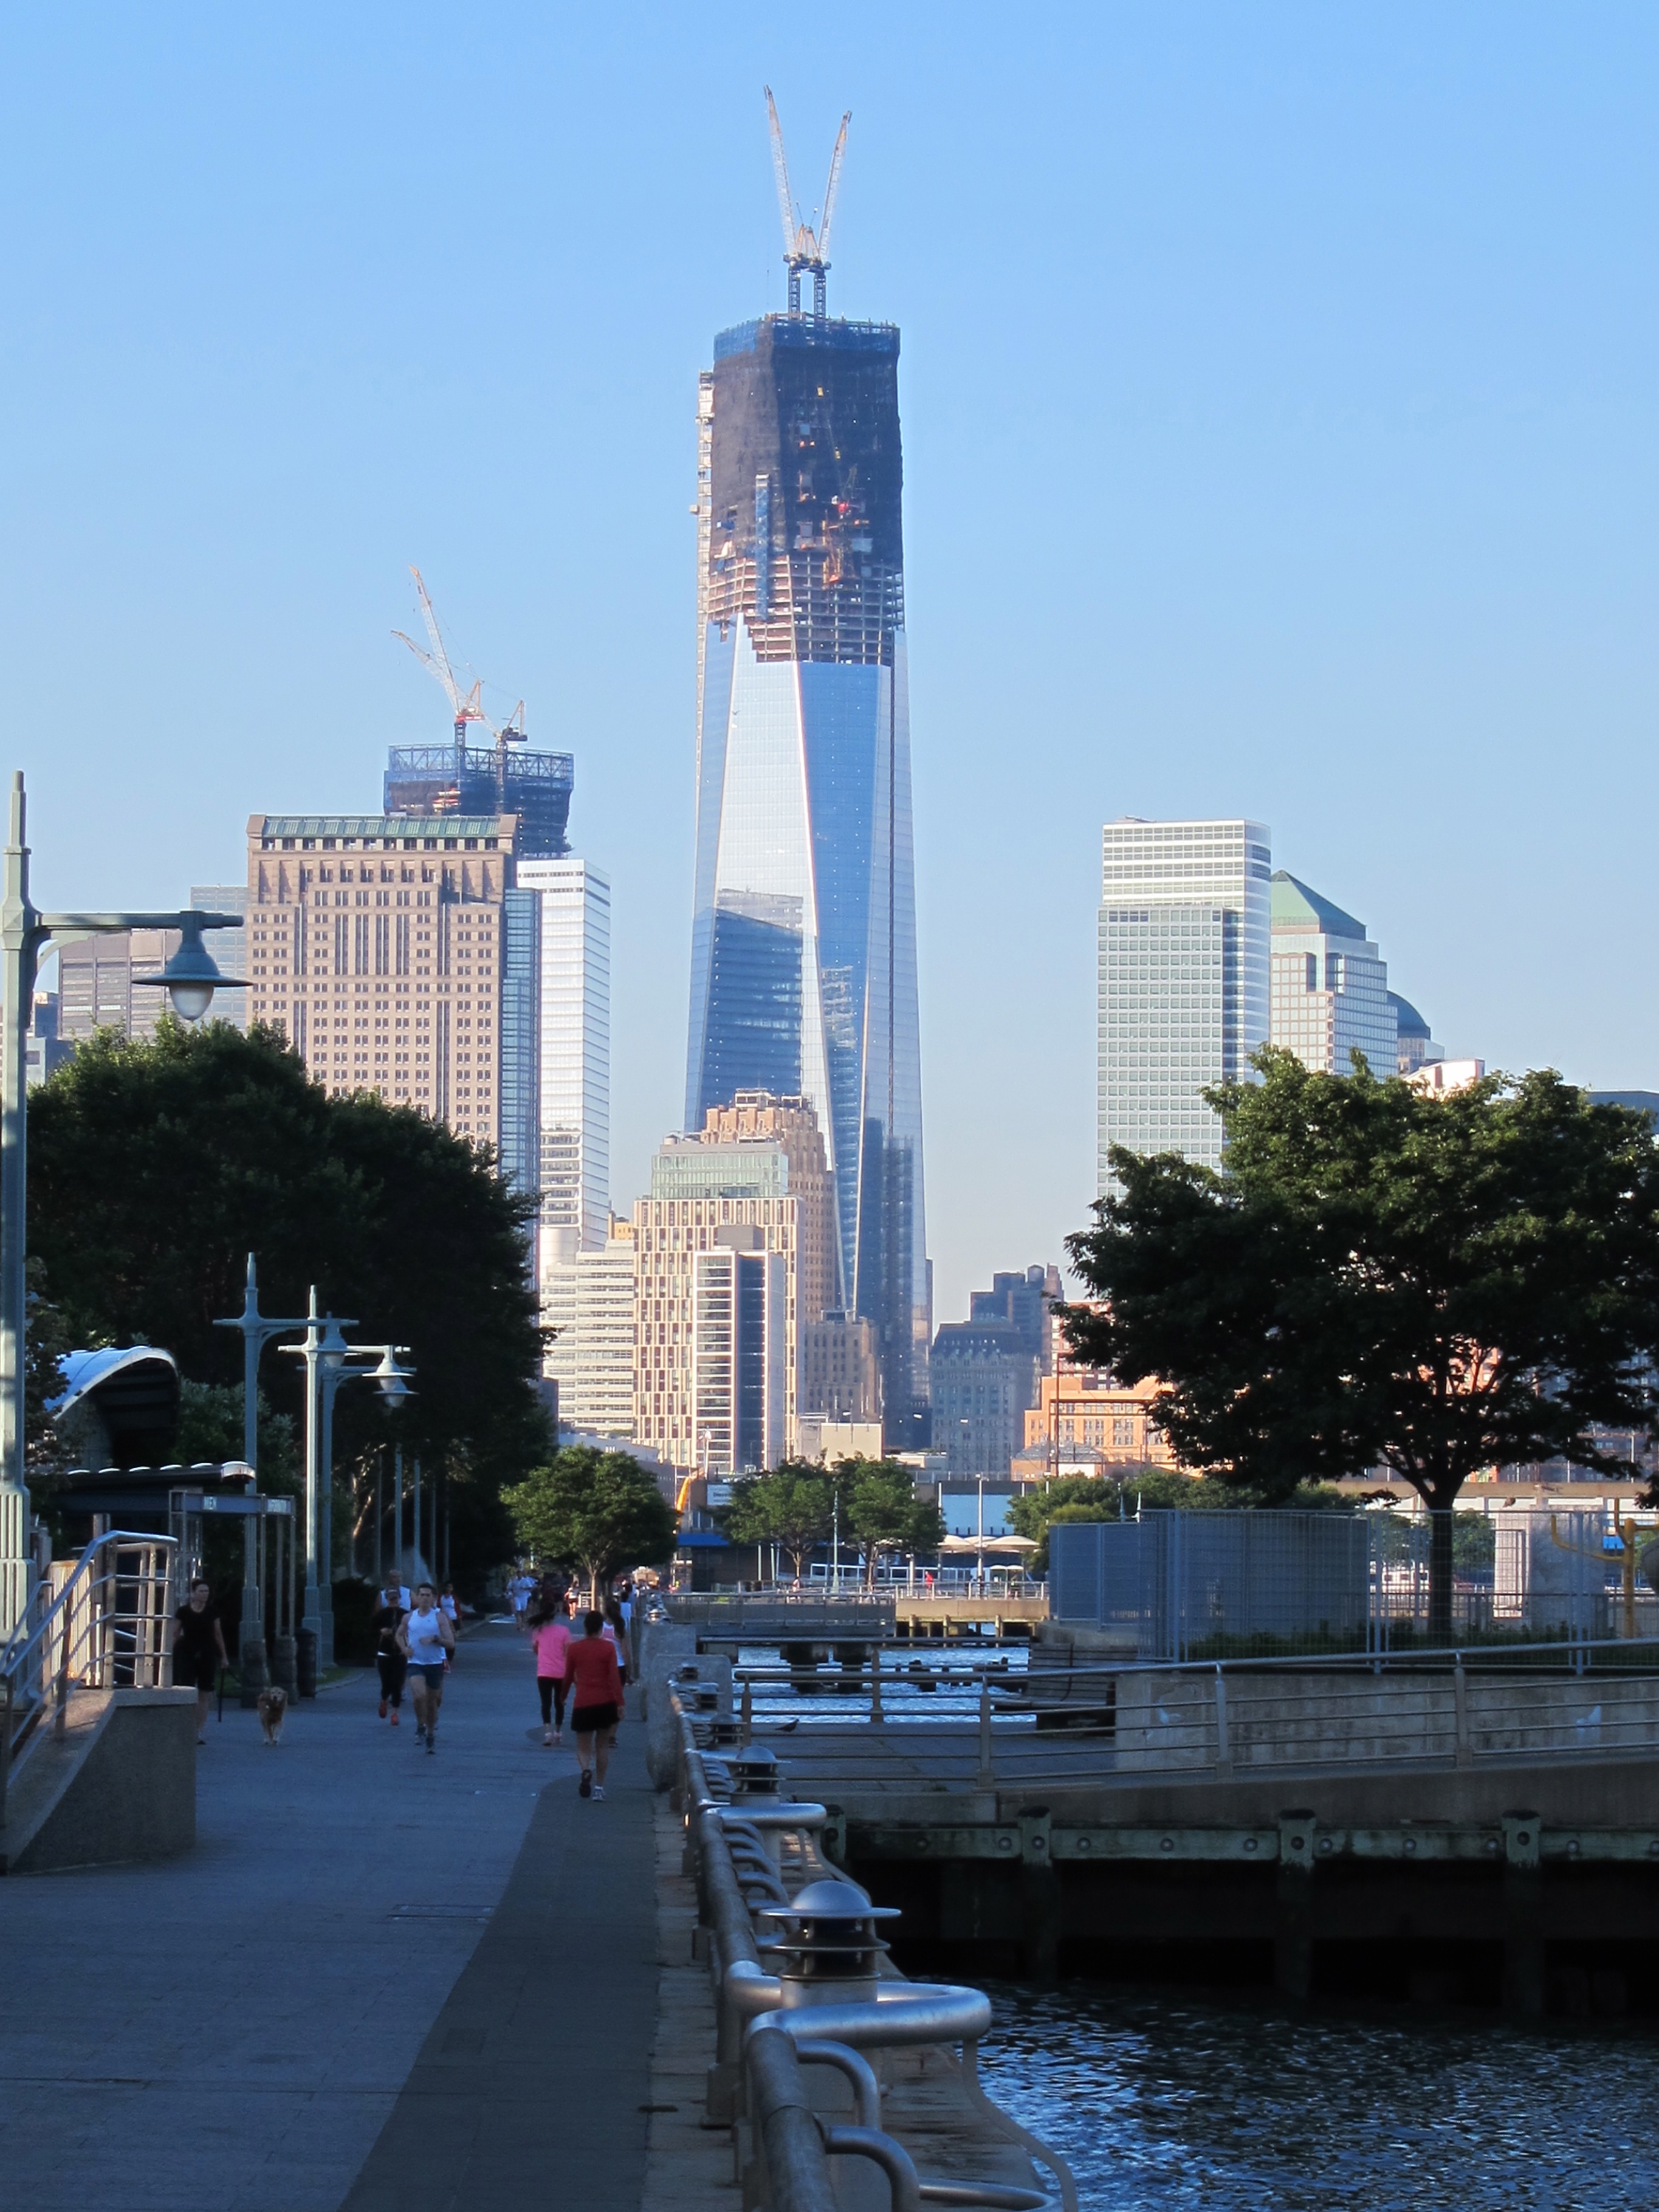 Remembering a horrible day  a look at the Freedom Tower WTC 1